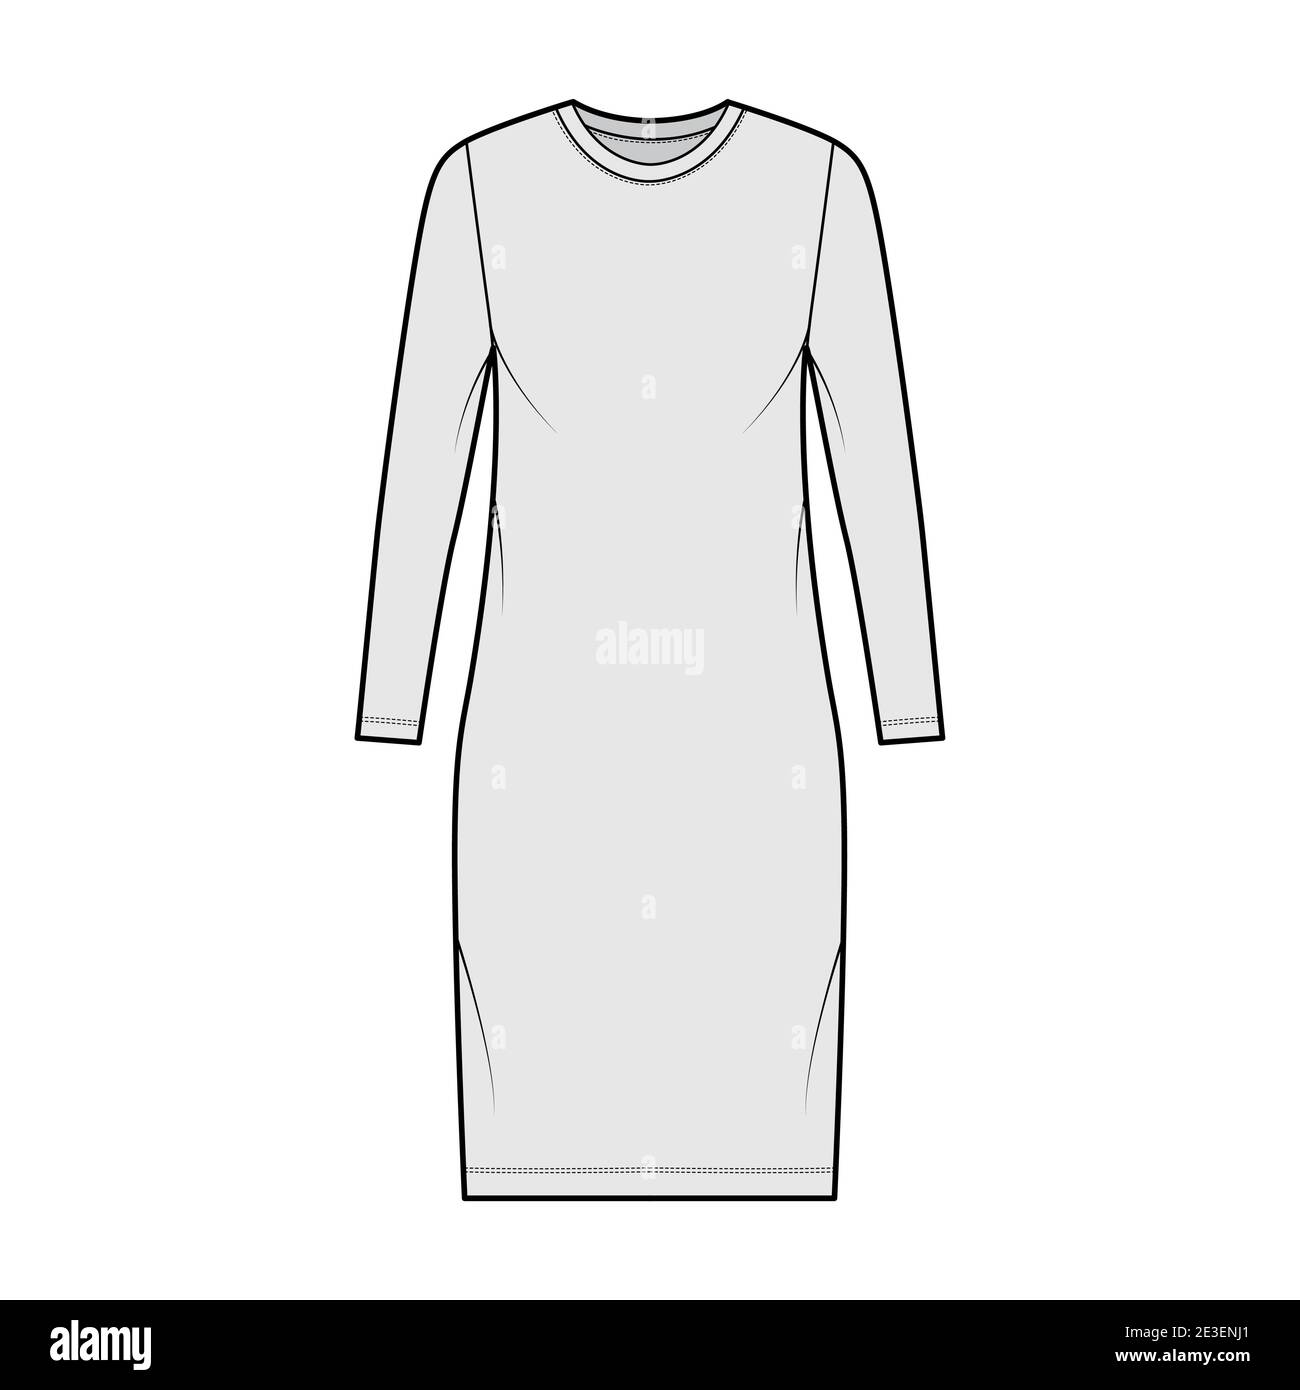 T-shirt dress technical fashion illustration with crew neck, long ...